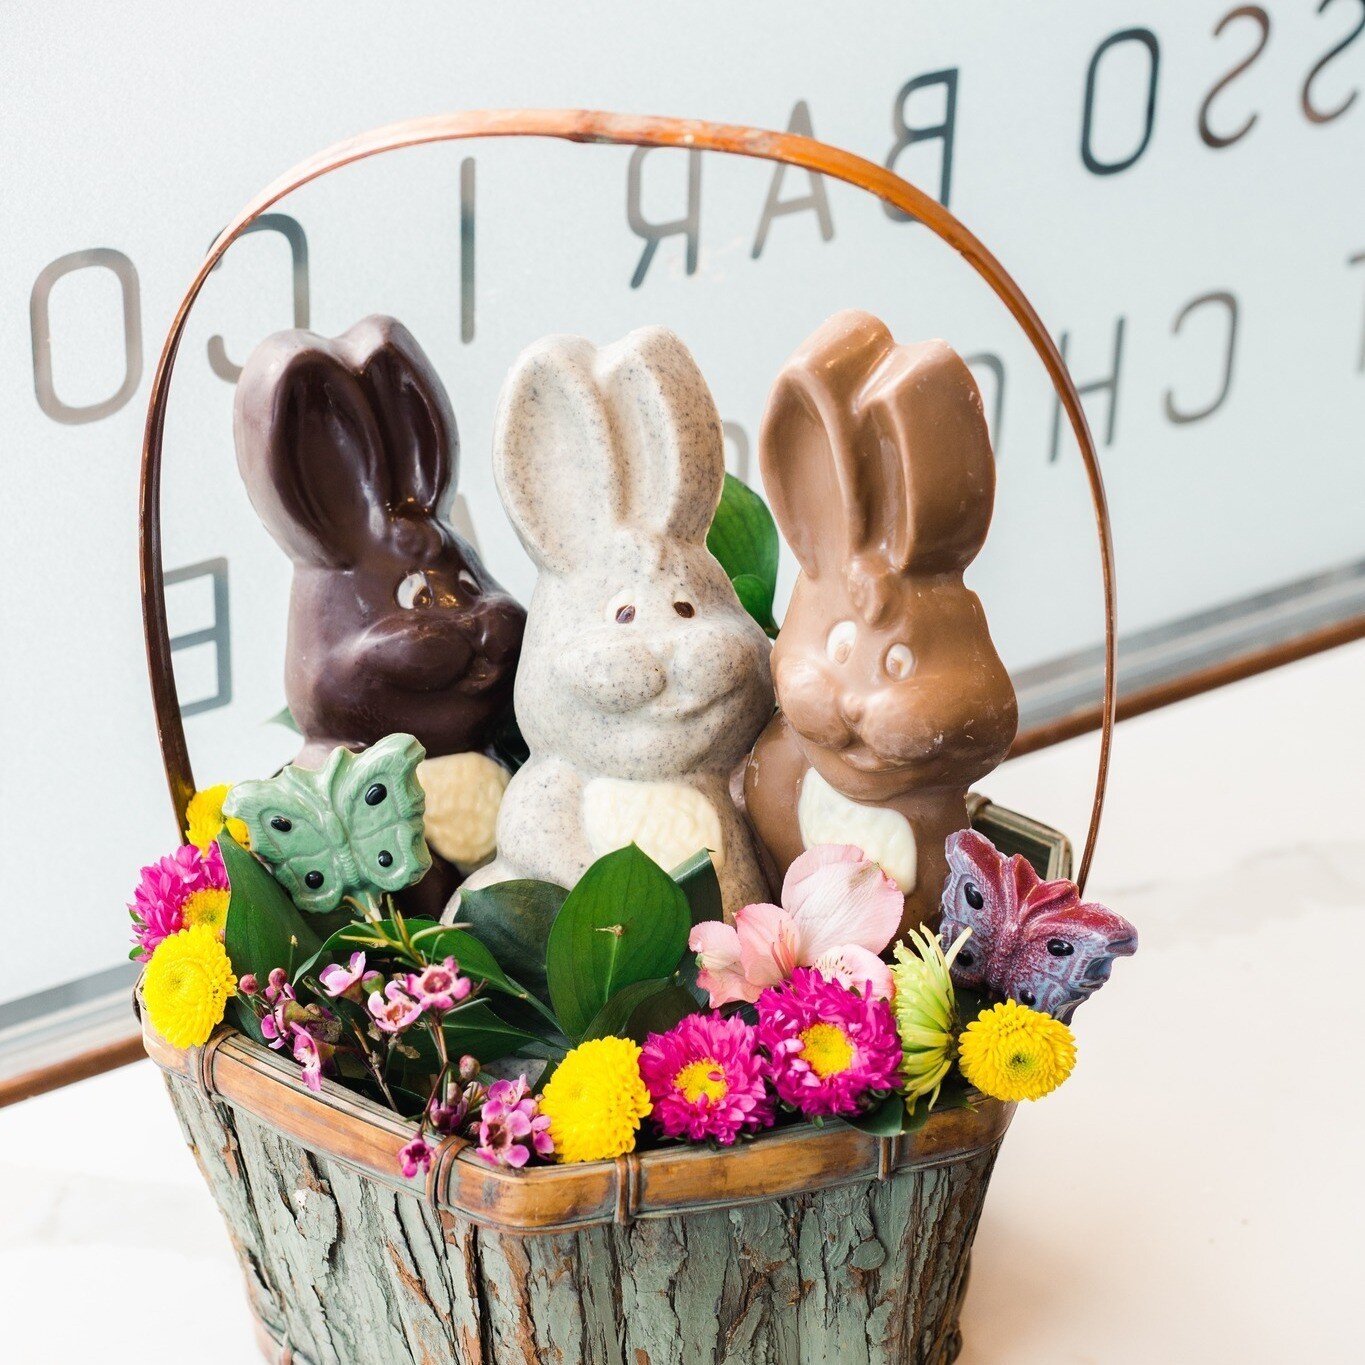 ⁠
Easter is almost here and along with spring time vibes and family celebration, Easter candy is an annual tradition we gift each other at #DurangoValleyView . The chocolate from Animas Chocolate company is so rich with a variety of flavor depths and